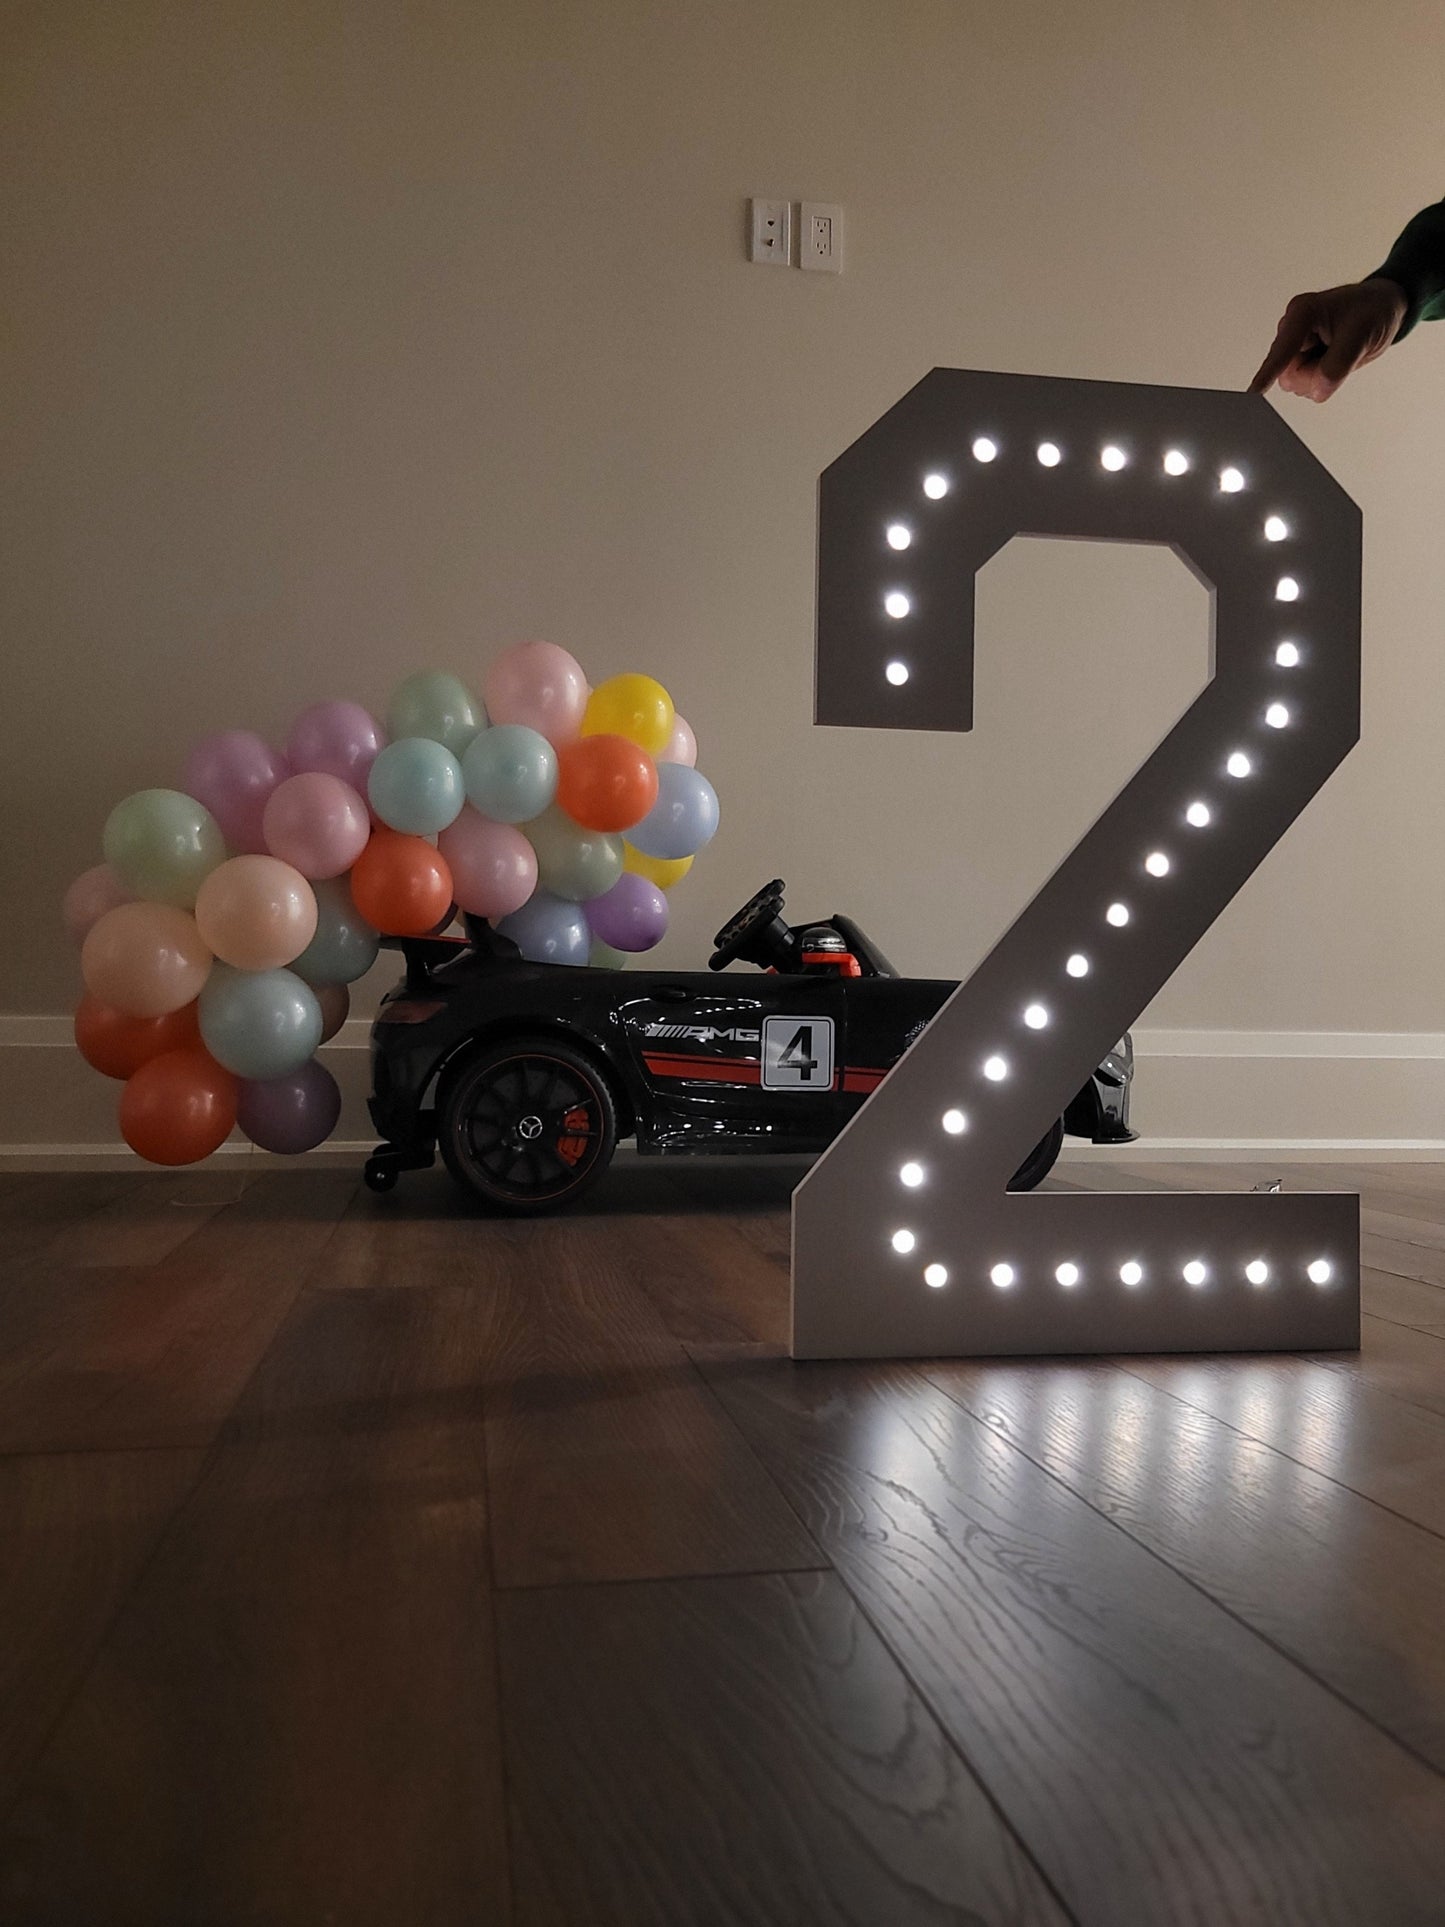 light up letters, light, LED Numbers, LED Marquee, LED alphabet, large numbers, happy birthday, first birthday, event decor, birthday ideas, birthday decorations, Marquee light up letters, Battery power LED, Birthday letters, Birthday Numbers